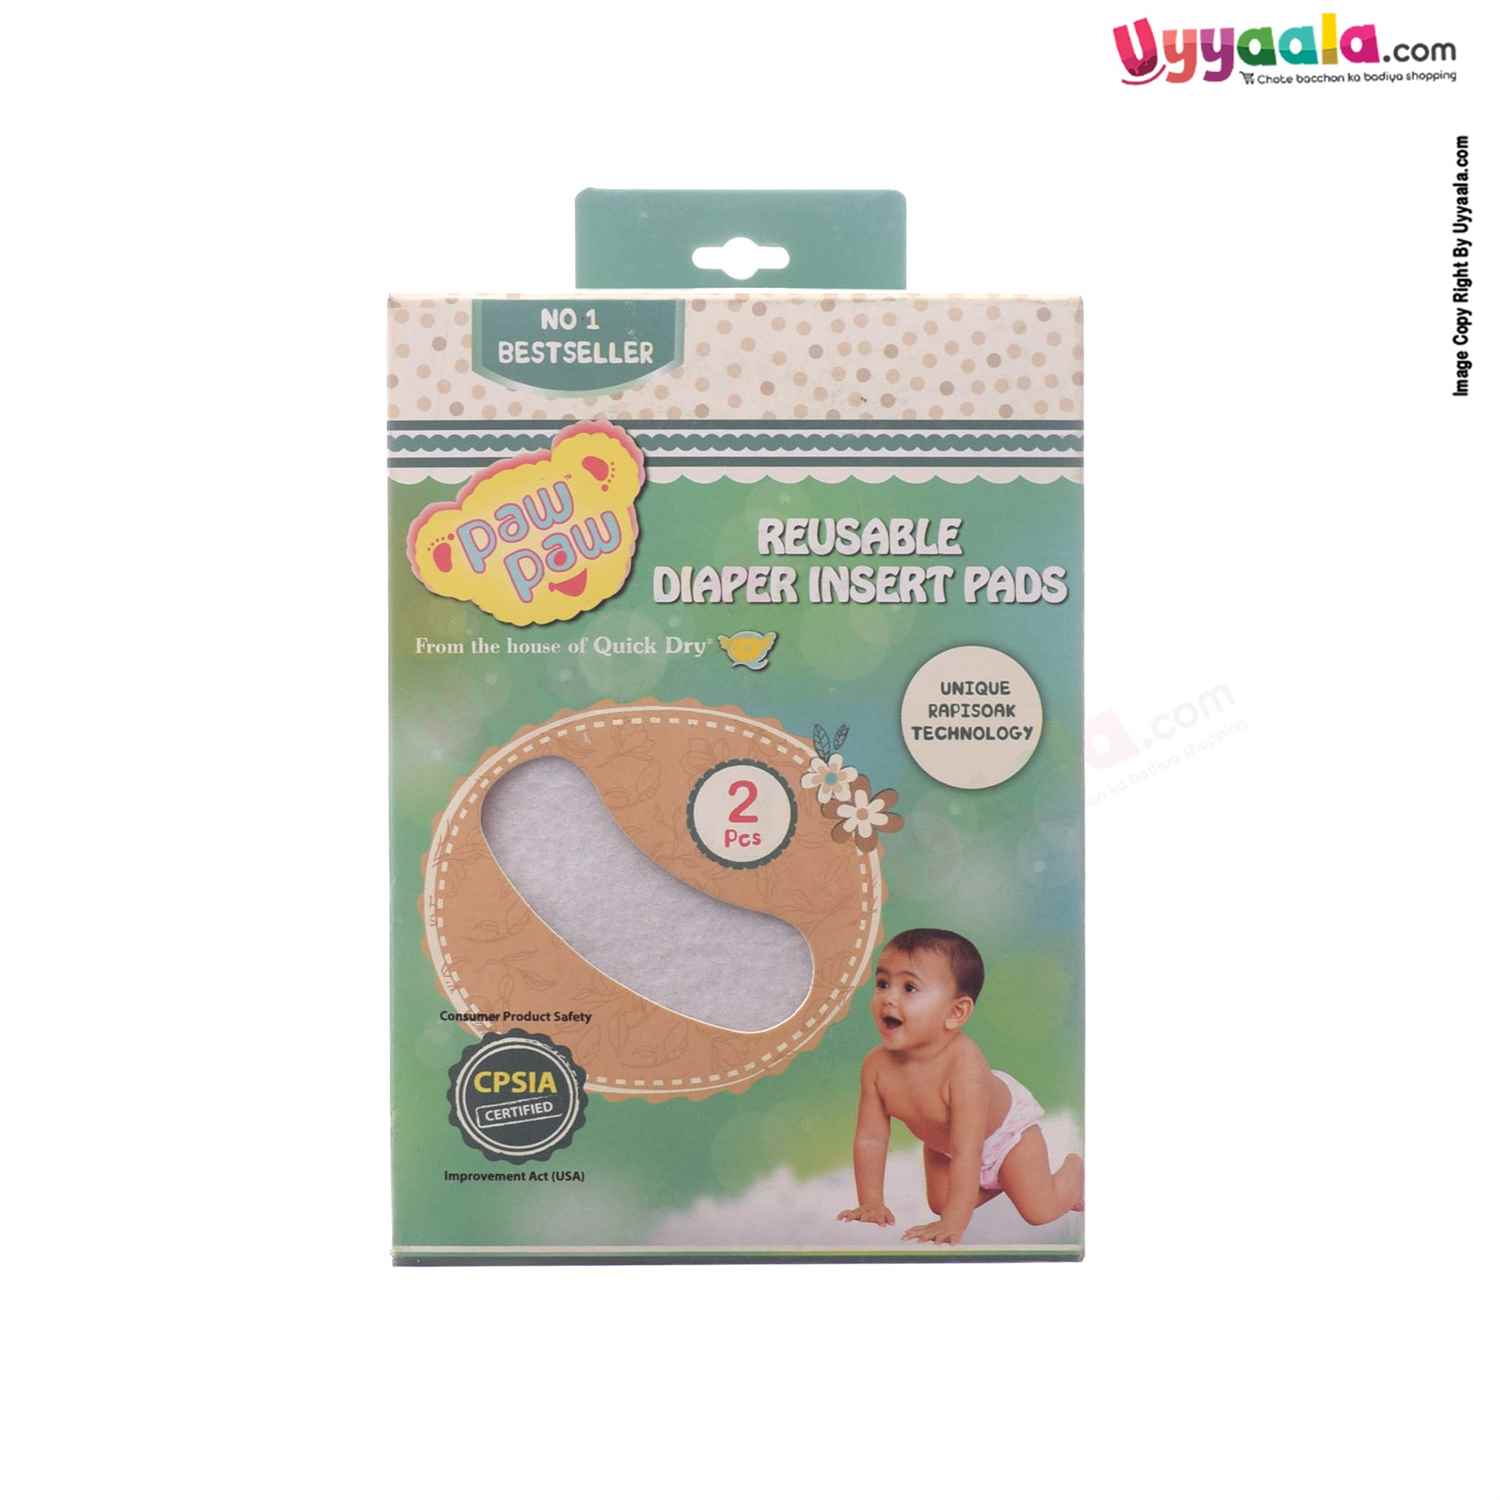 PAW PAW Baby Reusable Diaper Insert Pads 2pc Set, Size(30*10 cm)